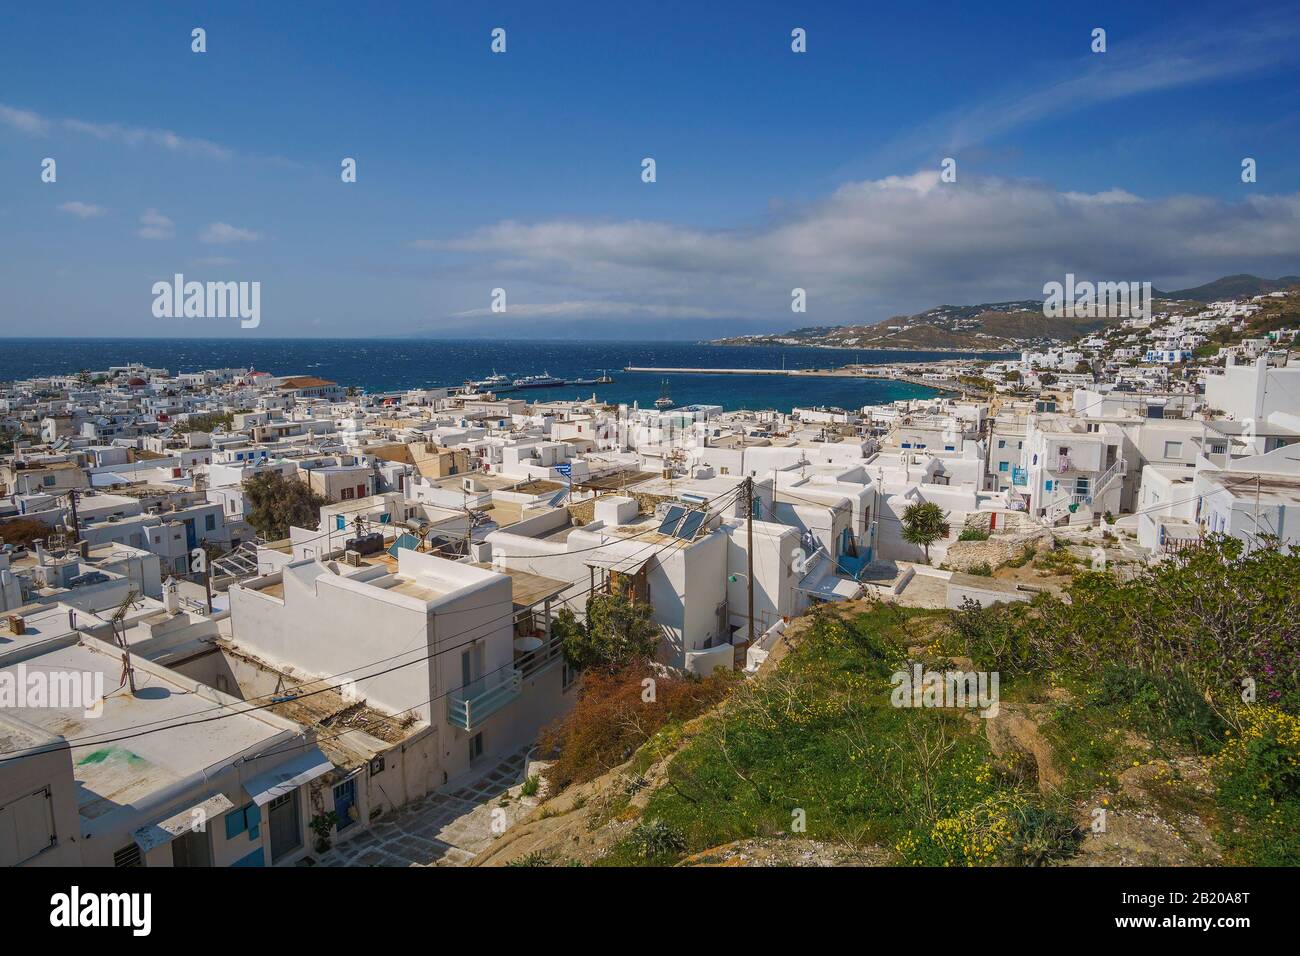 Panoramic aerial view of Mykonos island. It is one of the top destinations in Greece. Stock Photo